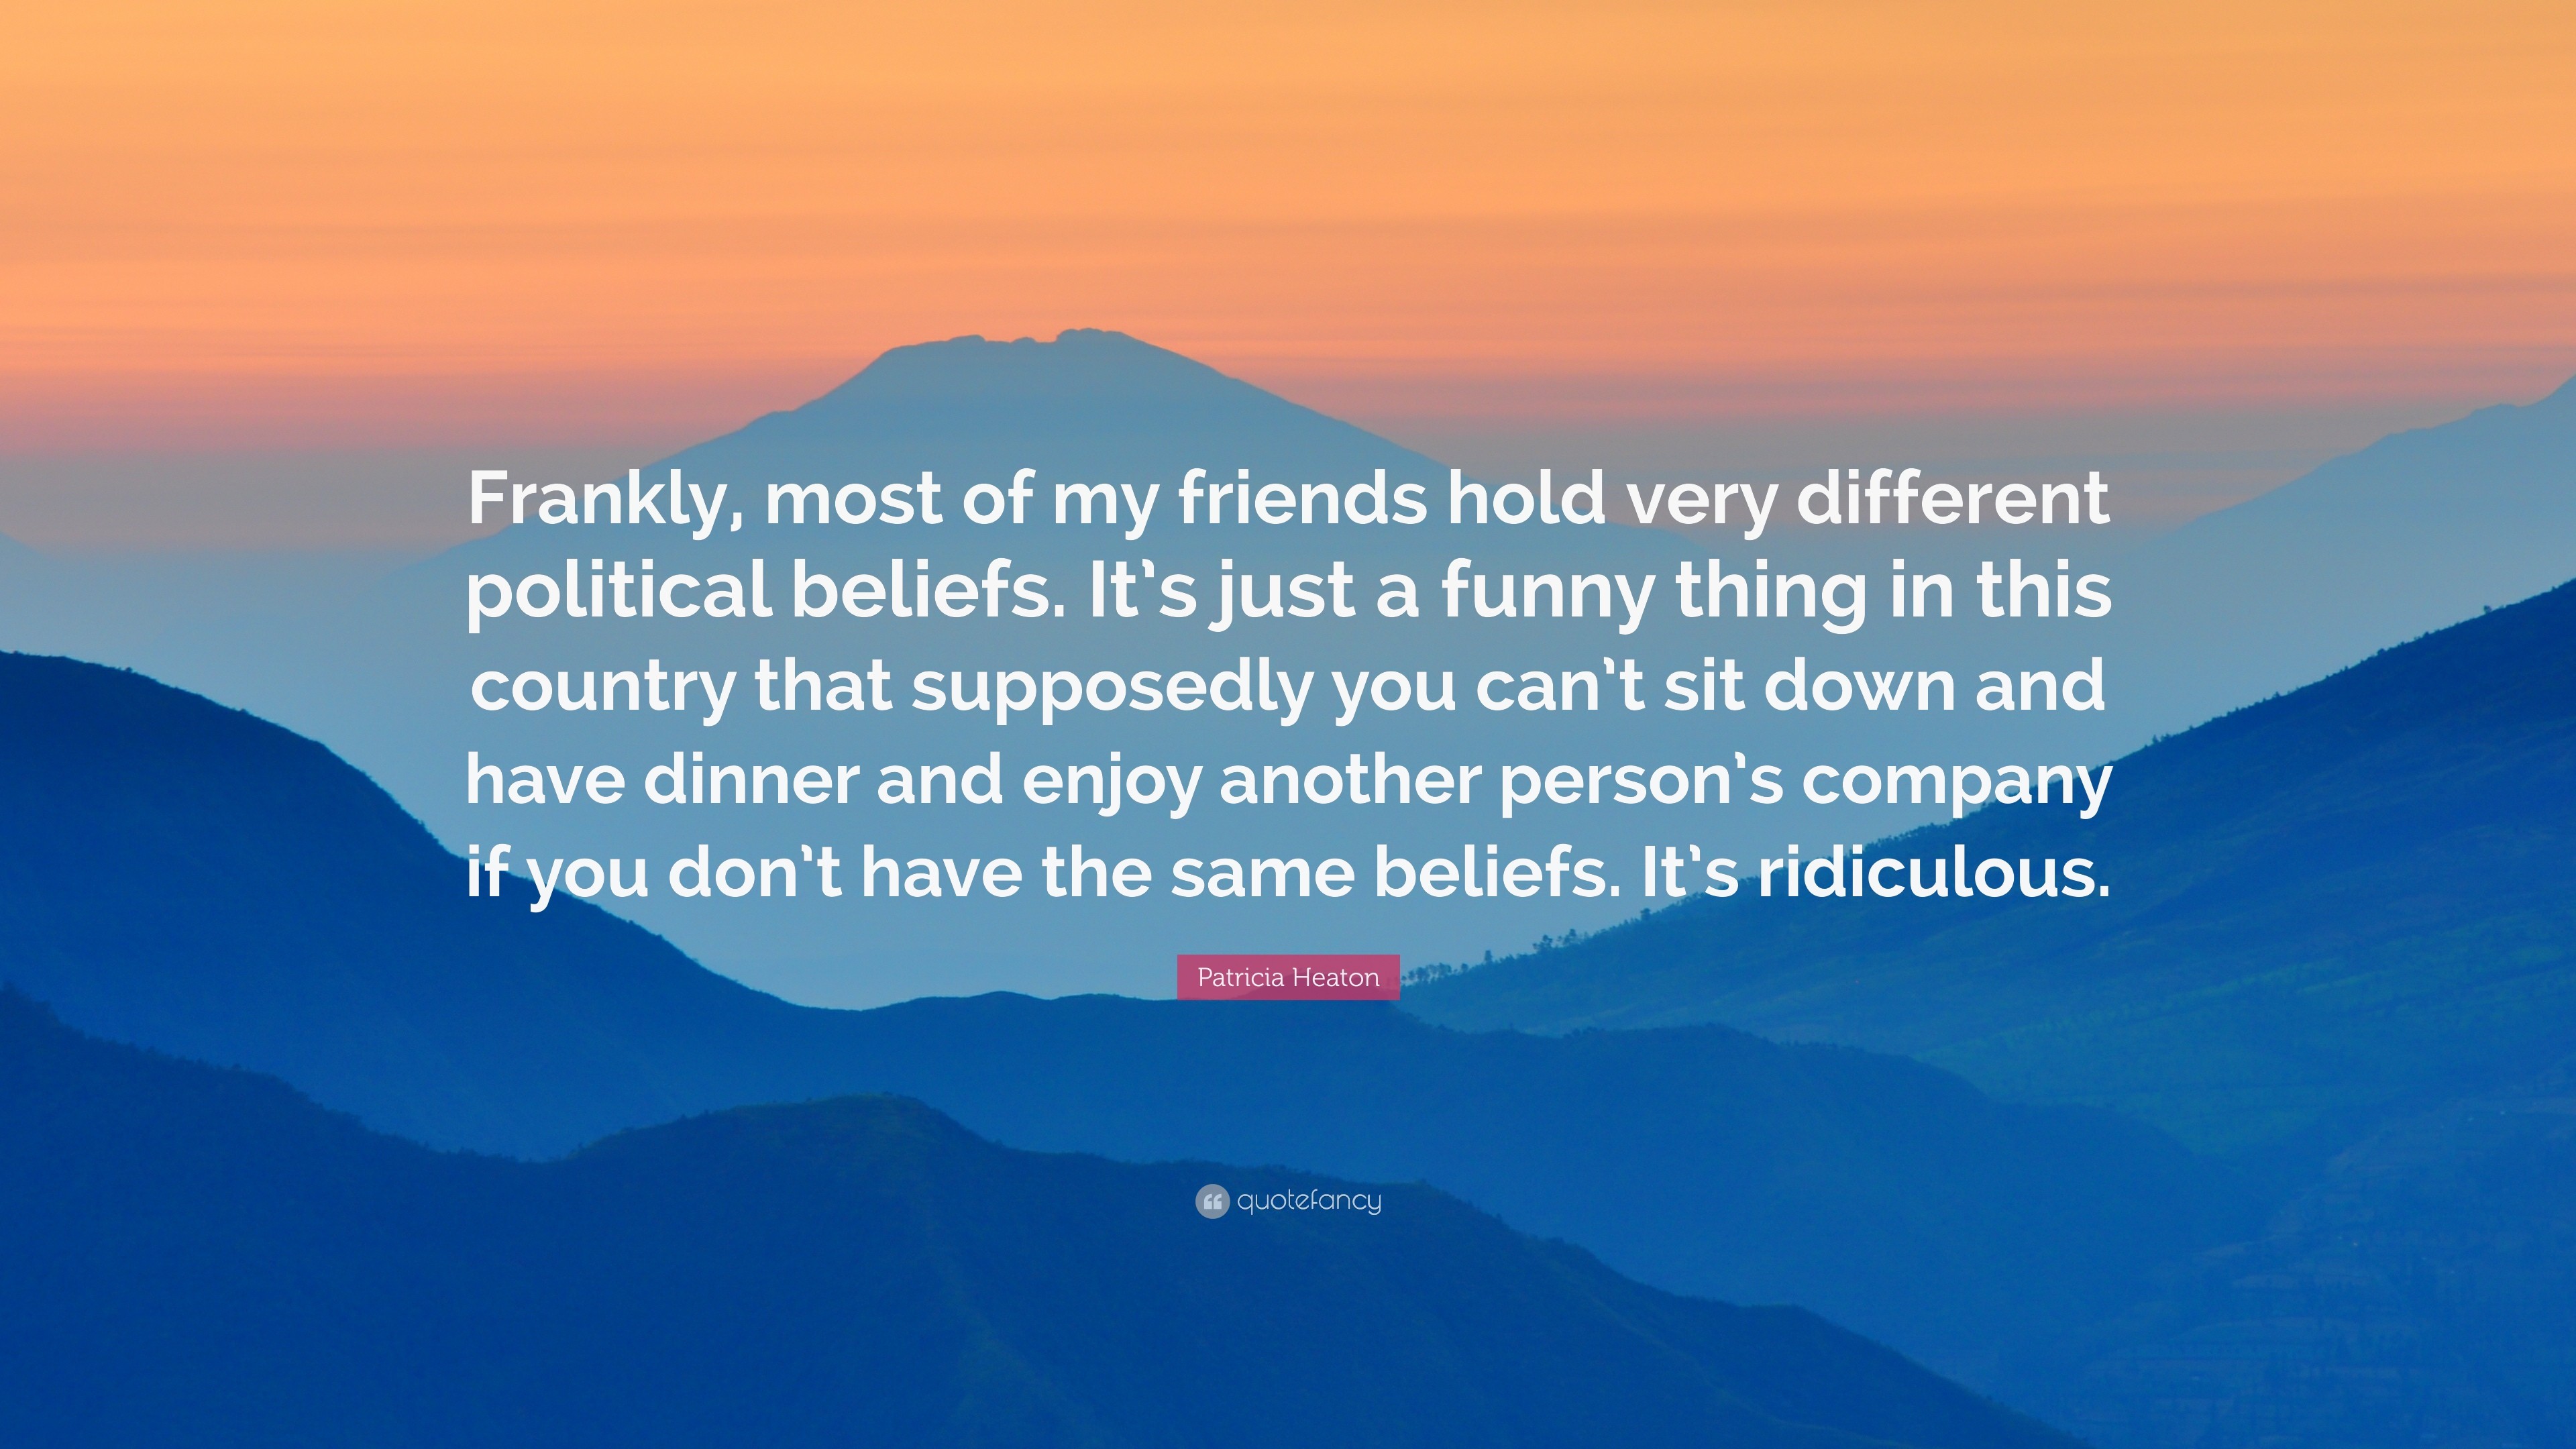 3840x2160 Patricia Heaton Quote: “Frankly, most of my friends hold very different  political beliefs